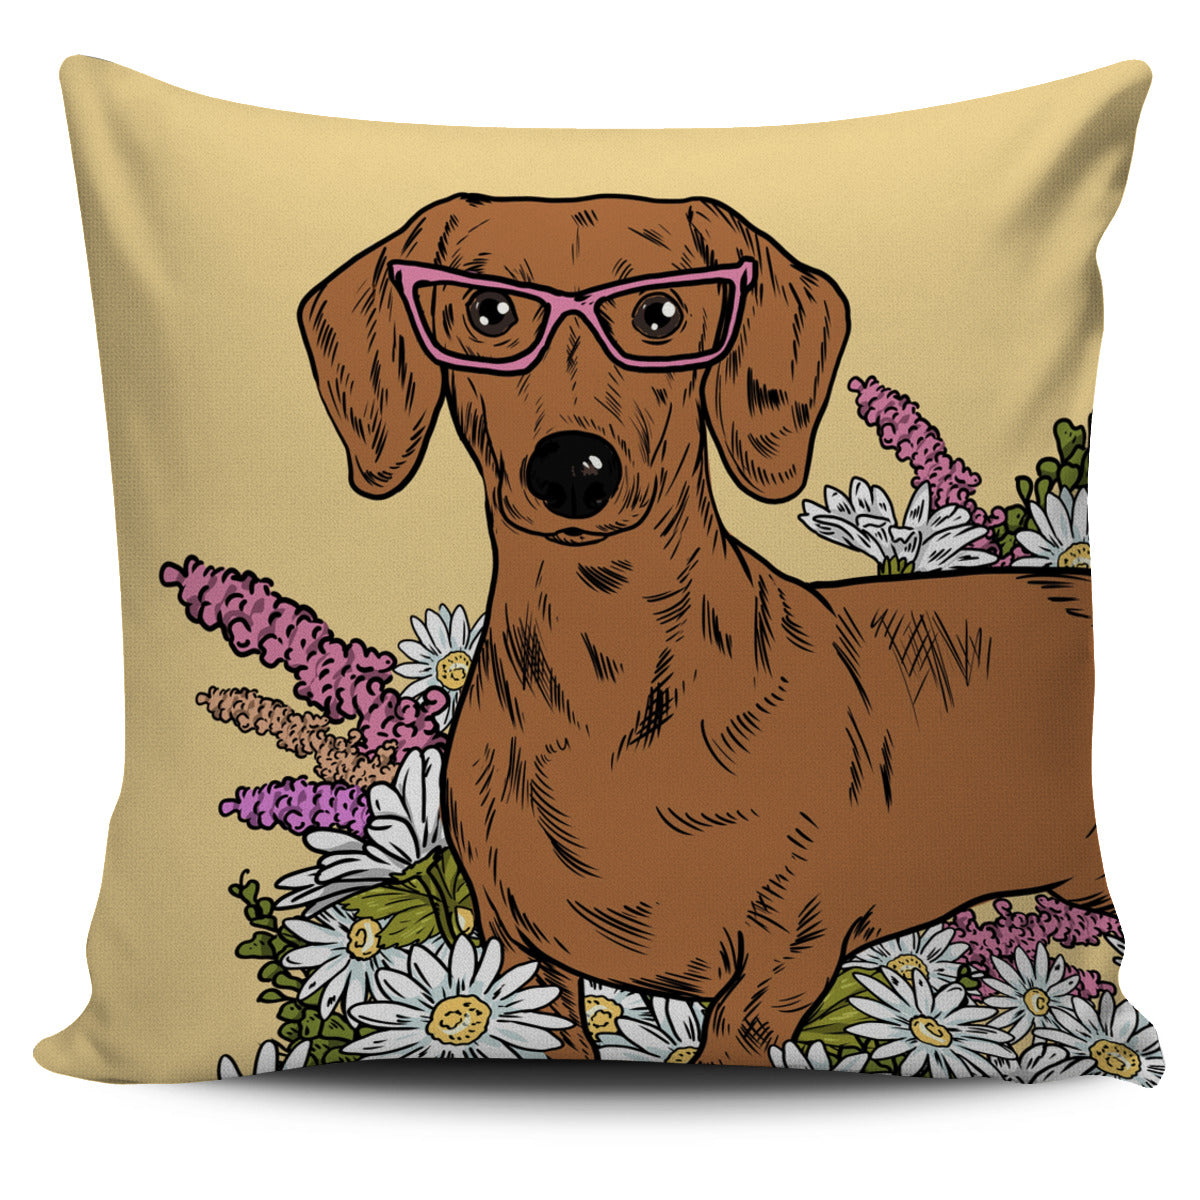 Illustrated Dachshund Pillow Cover